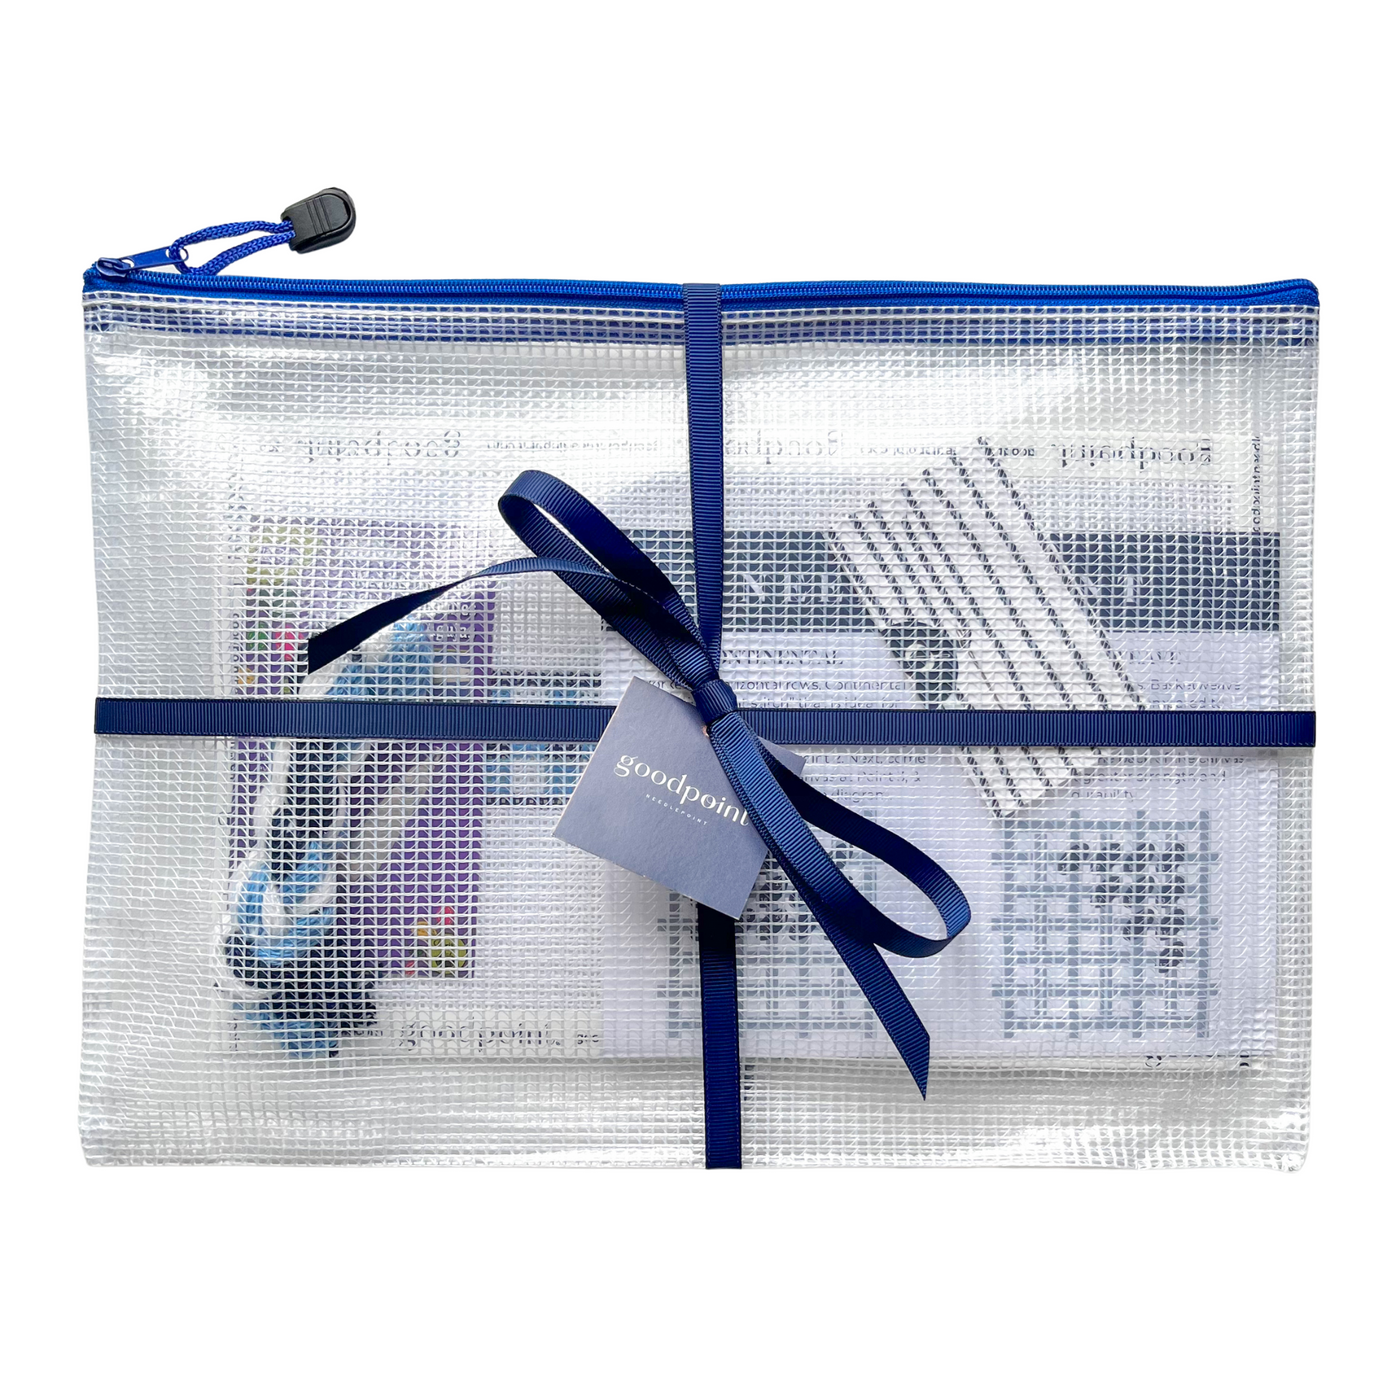 Needlepoint project bag filled with supplies is tied up with a navy grosgrain ribbon